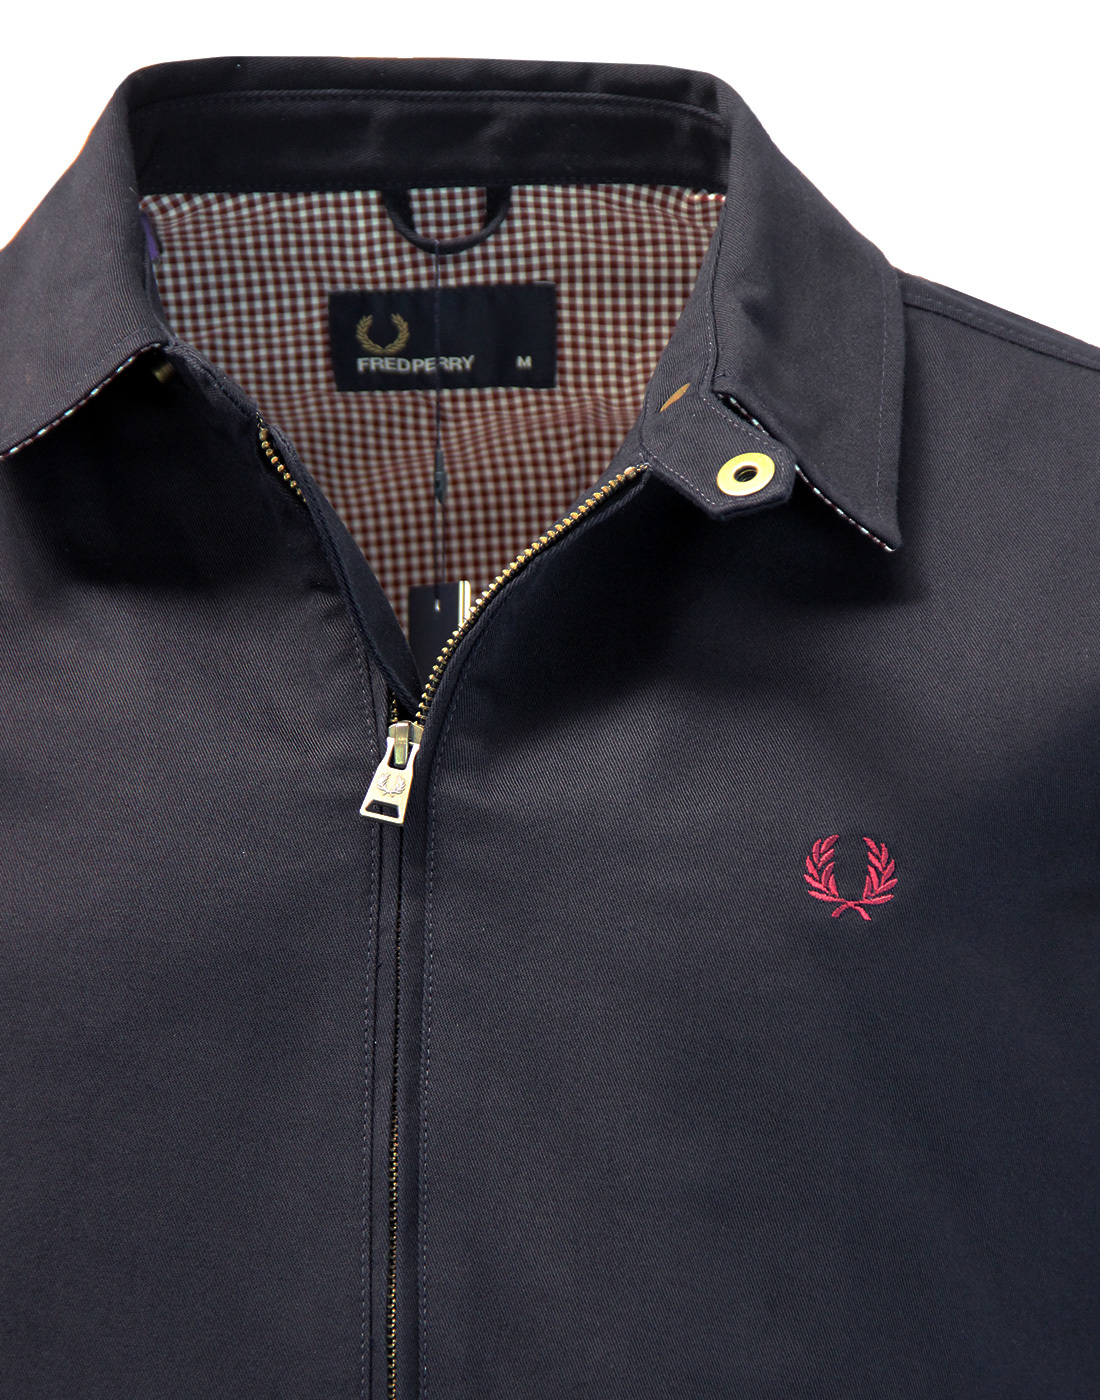 FRED PERRY Retro Mod 70s Caban Jacket in Navy